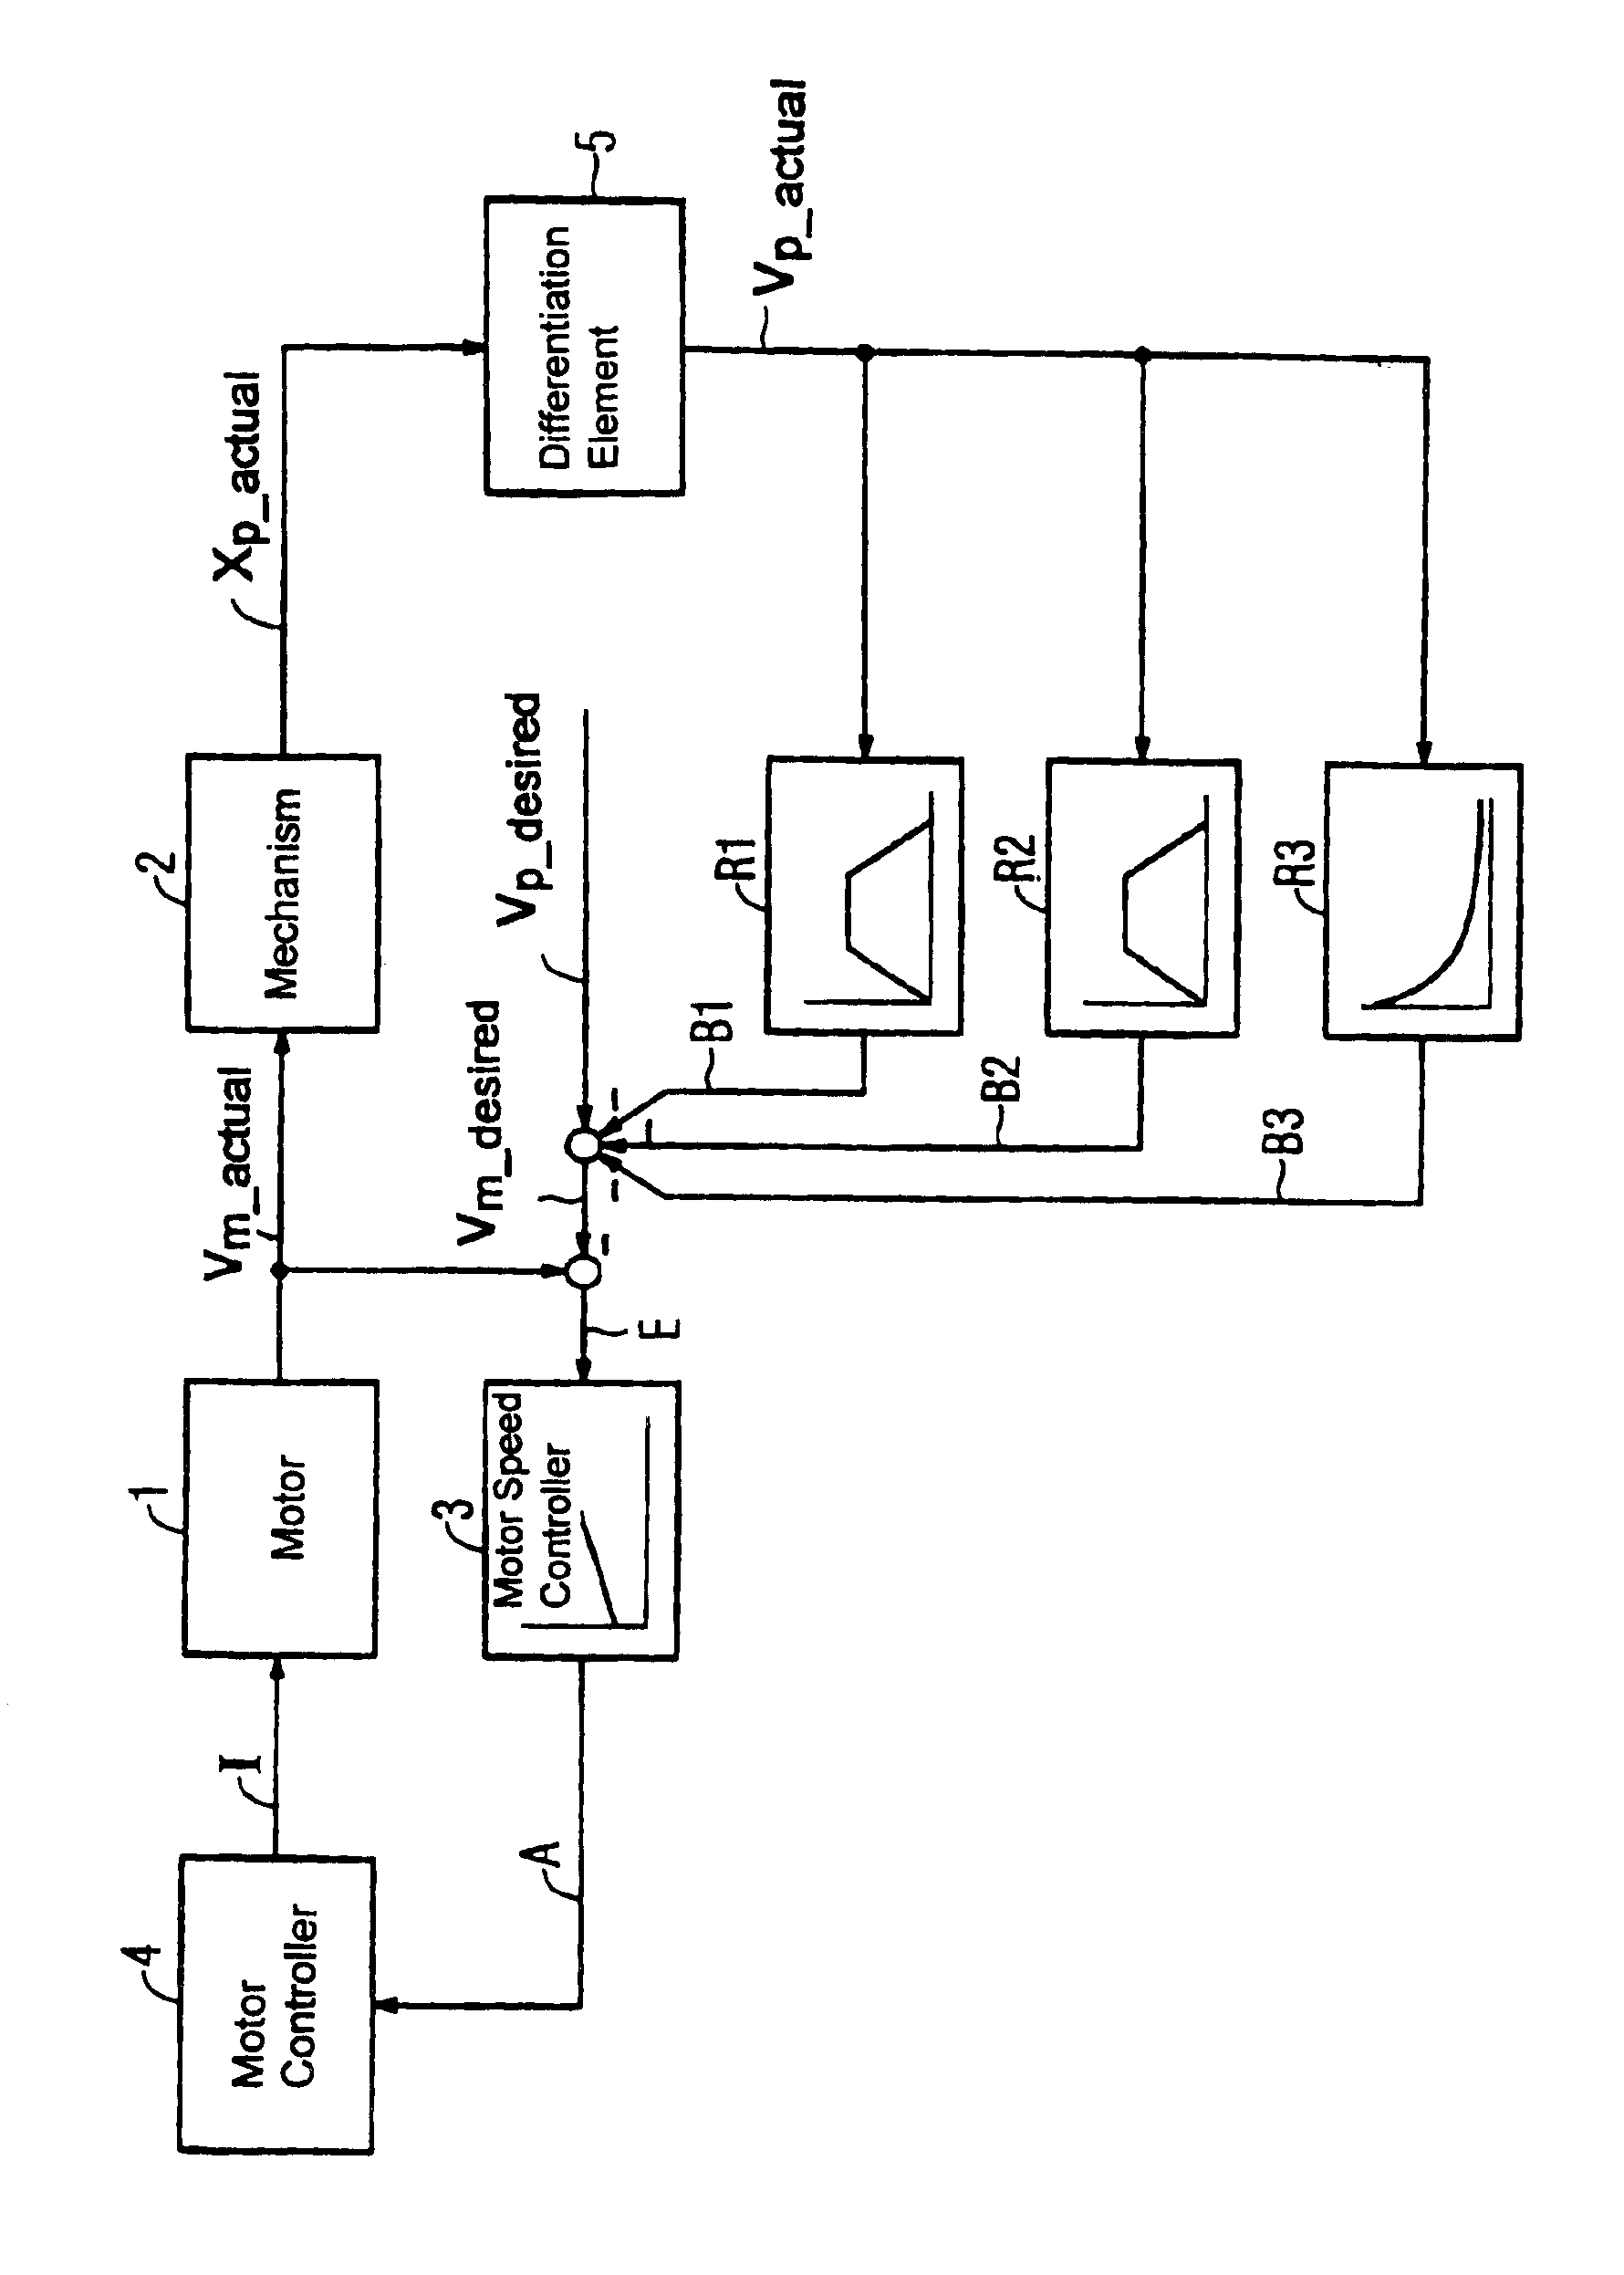 Method and apparatus for damping mechanical oscillations of a shaft in machine tools, manufacturing machines and robots